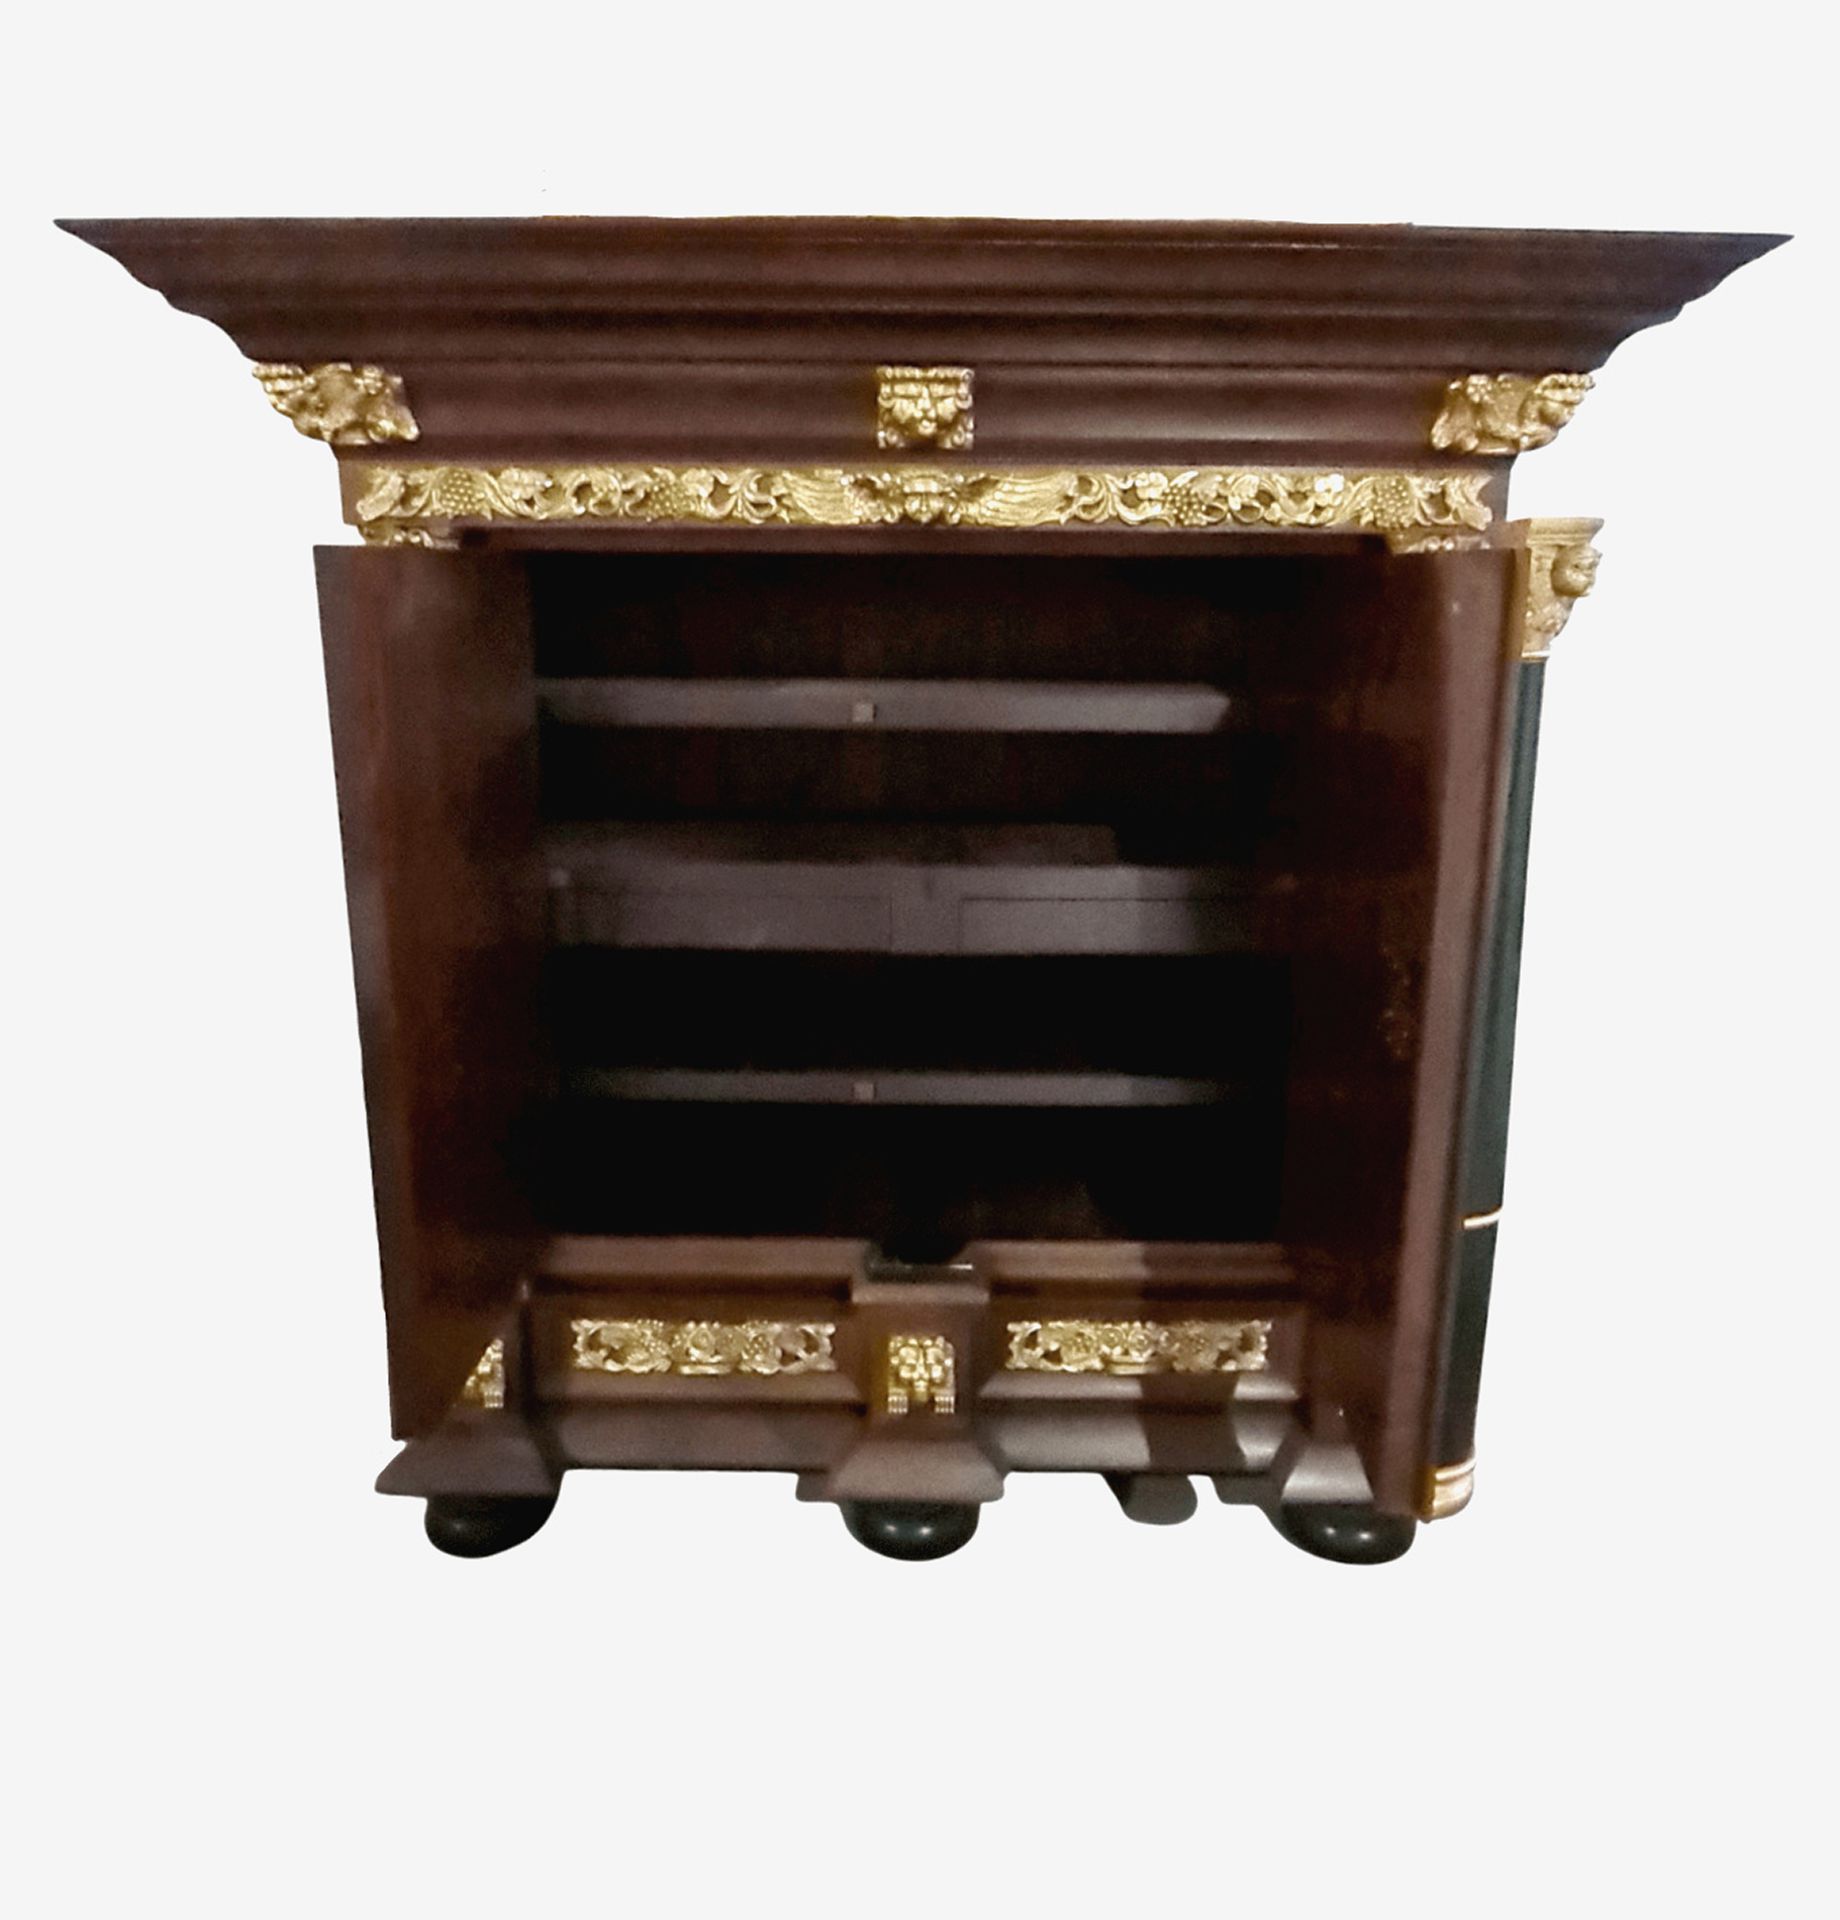 Dutch Chest in Ebonized Wood and Gilt Bronze Sconces, 19th Century